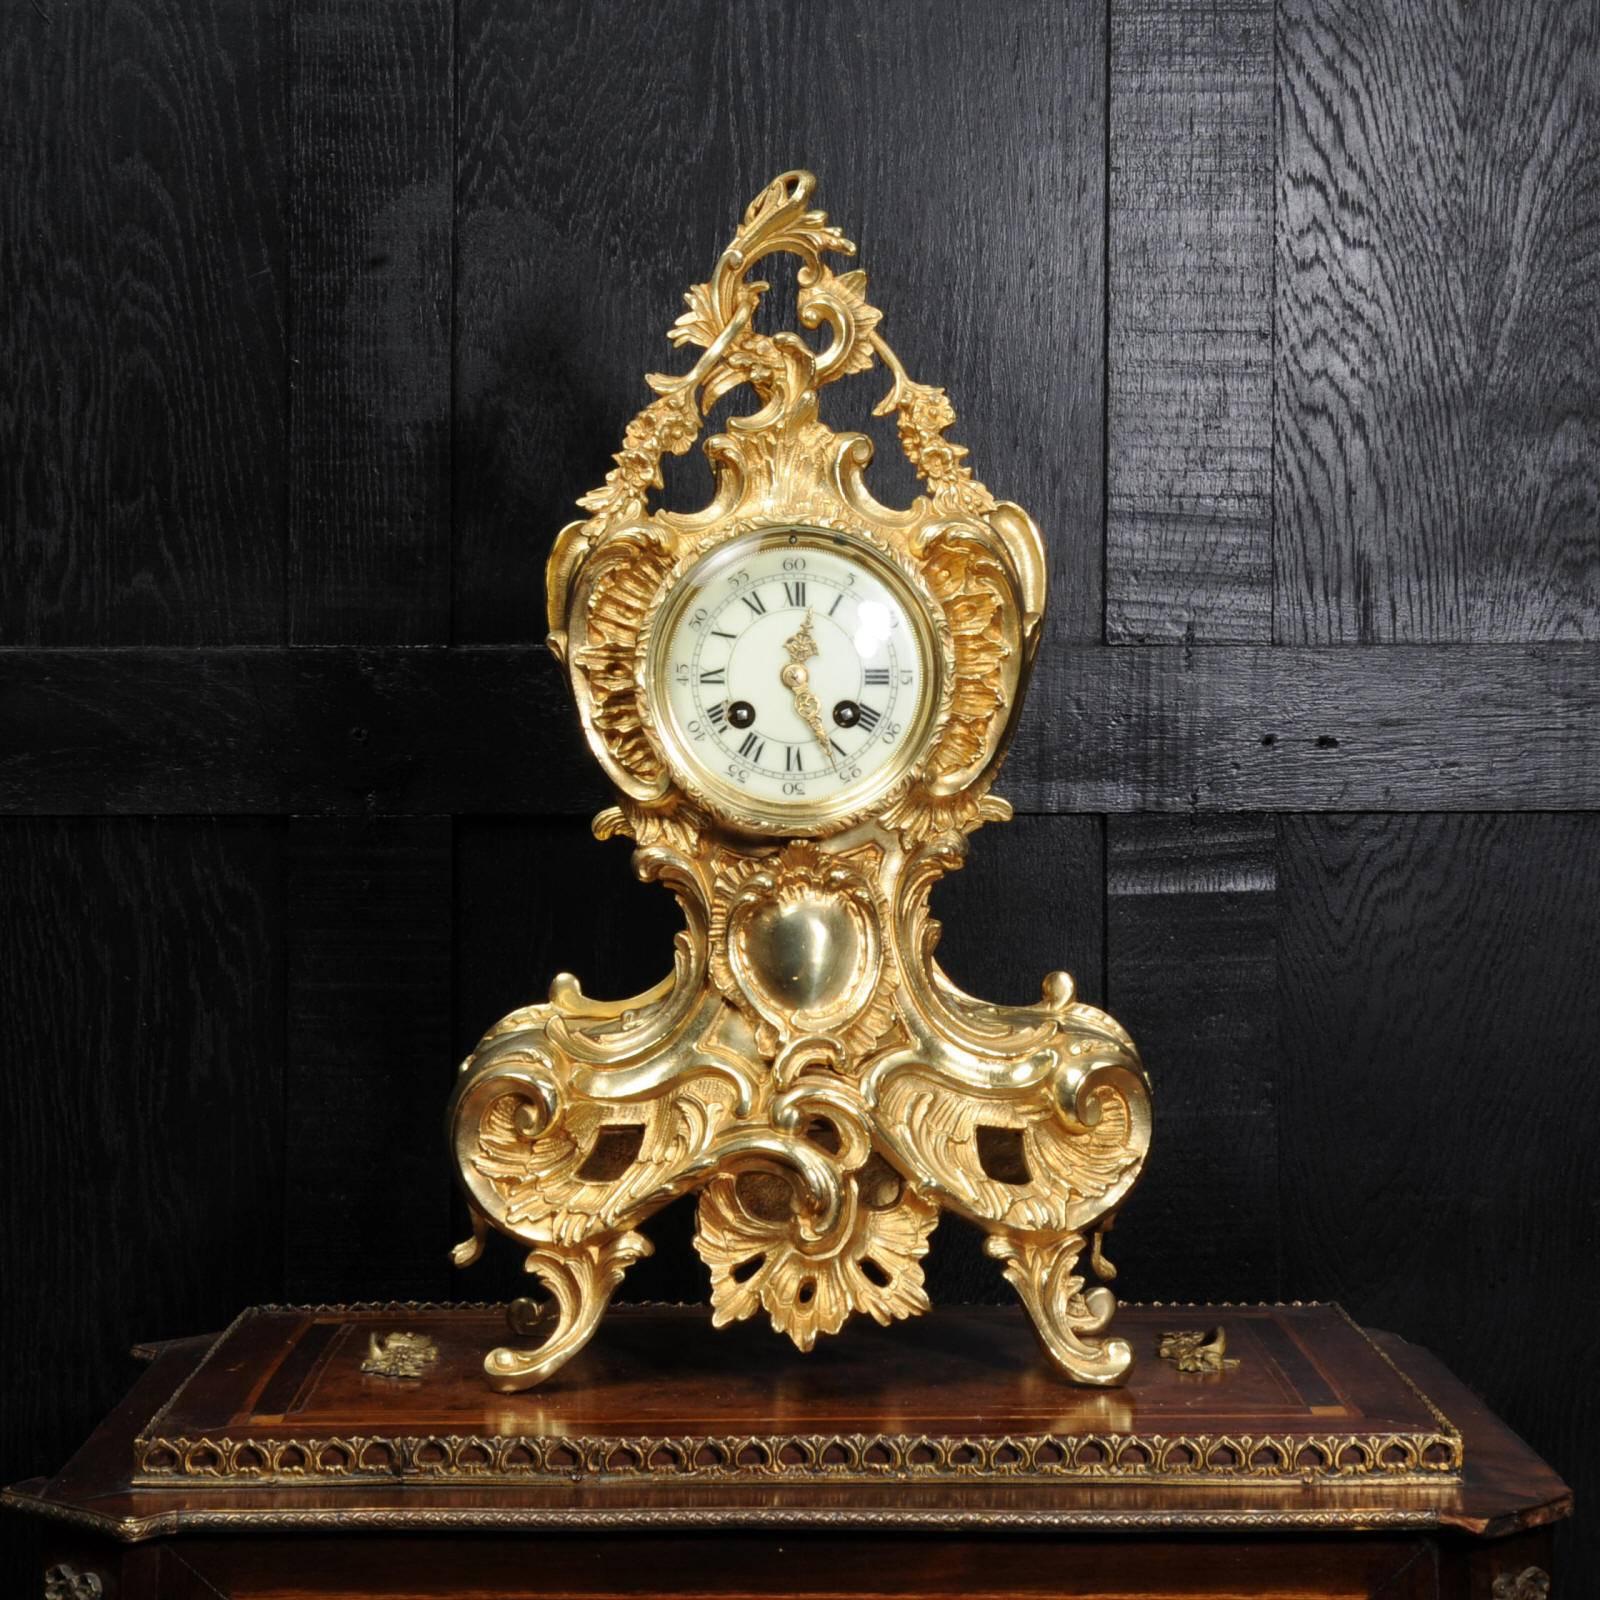 A stunning original antique French gilt bronze Rococo clock. Flamboyant deeply waisted asymmetric Rococo shape decorated with acanthus, scrolls and floral swags. The dial is cream porcelain enamel on copper with separate minute ring and beautifully